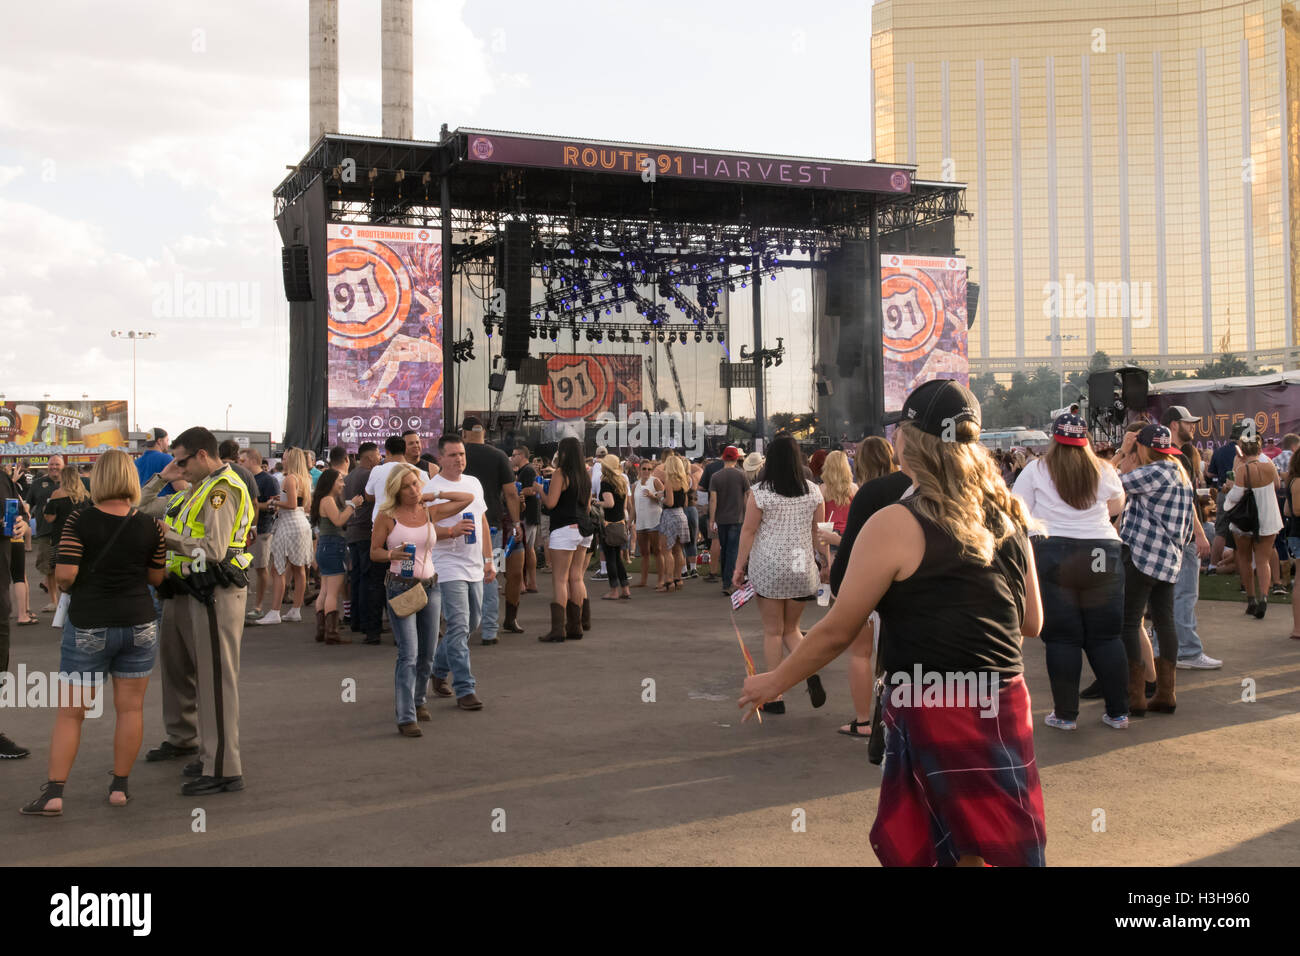 The crowd enjoys the Route 91 Harvest Festival at Las Vegas Village in